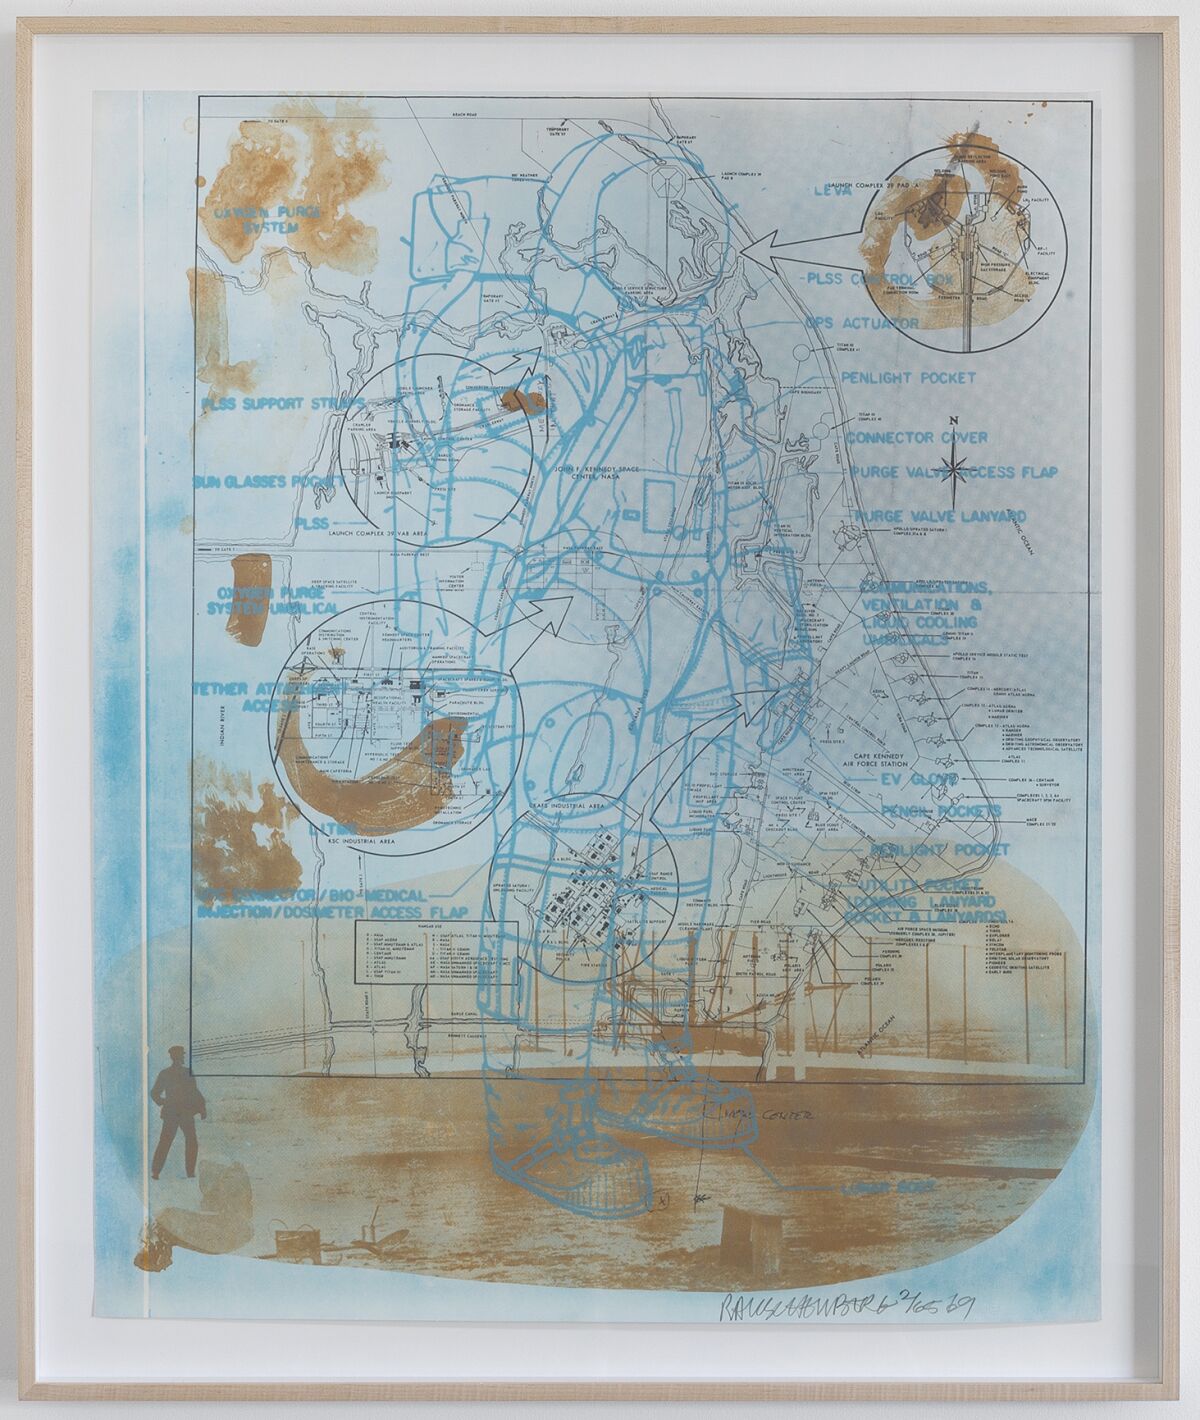 "Trust Zone," 1969, a three-color lithograph by Robert Rauschenberg, from the exhibition "Robert Rauschenberg at Gemini G.E.L.: Selected Works, 1969-2000."